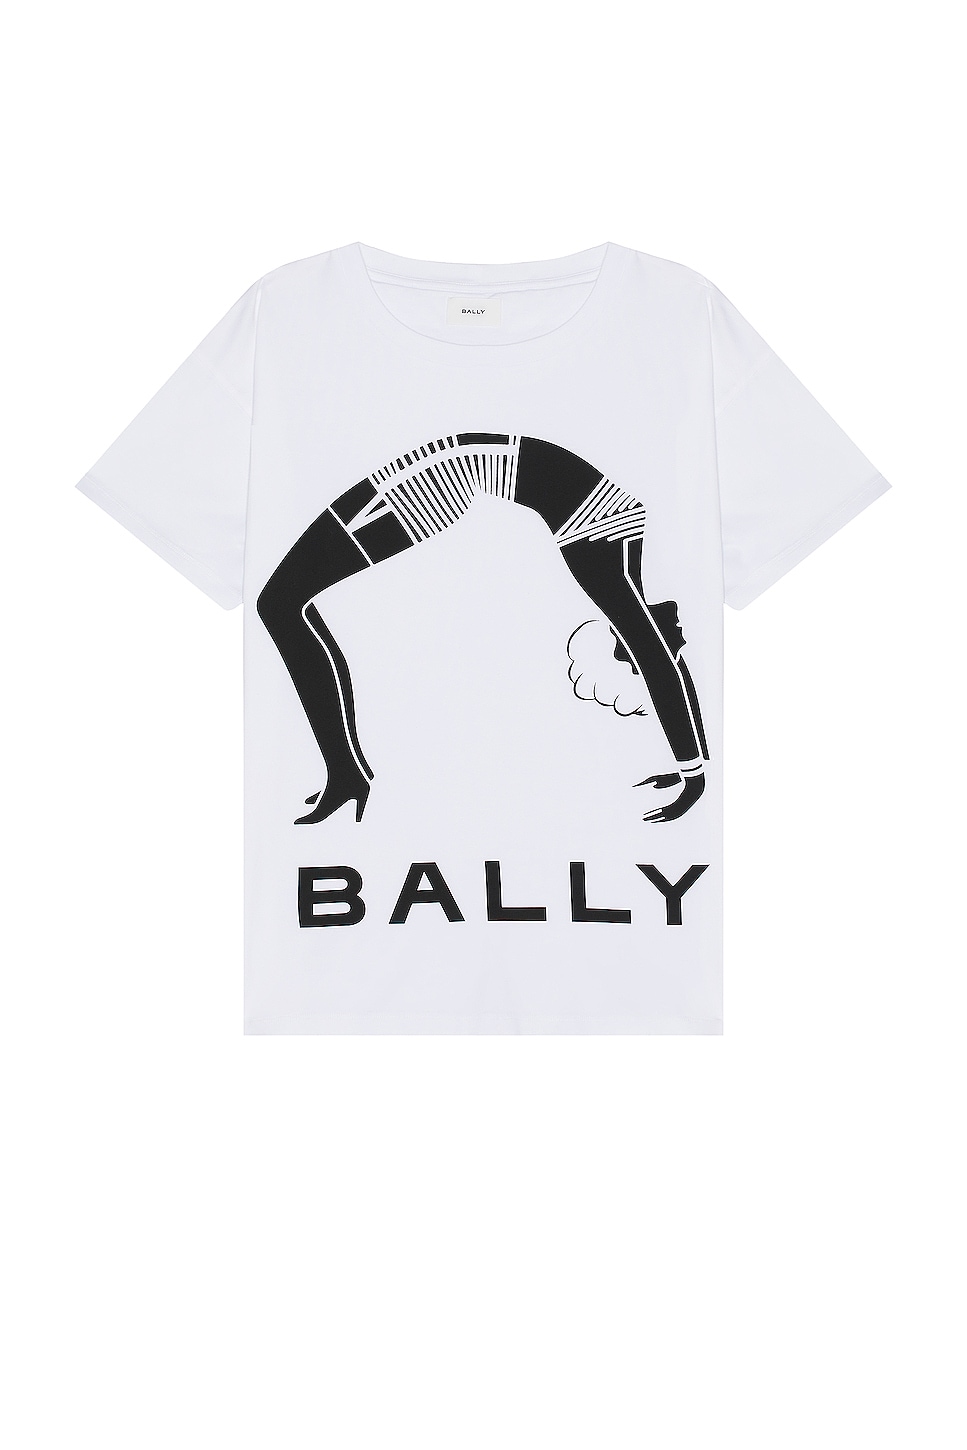 Image 1 of Bally T-shirt in White 50